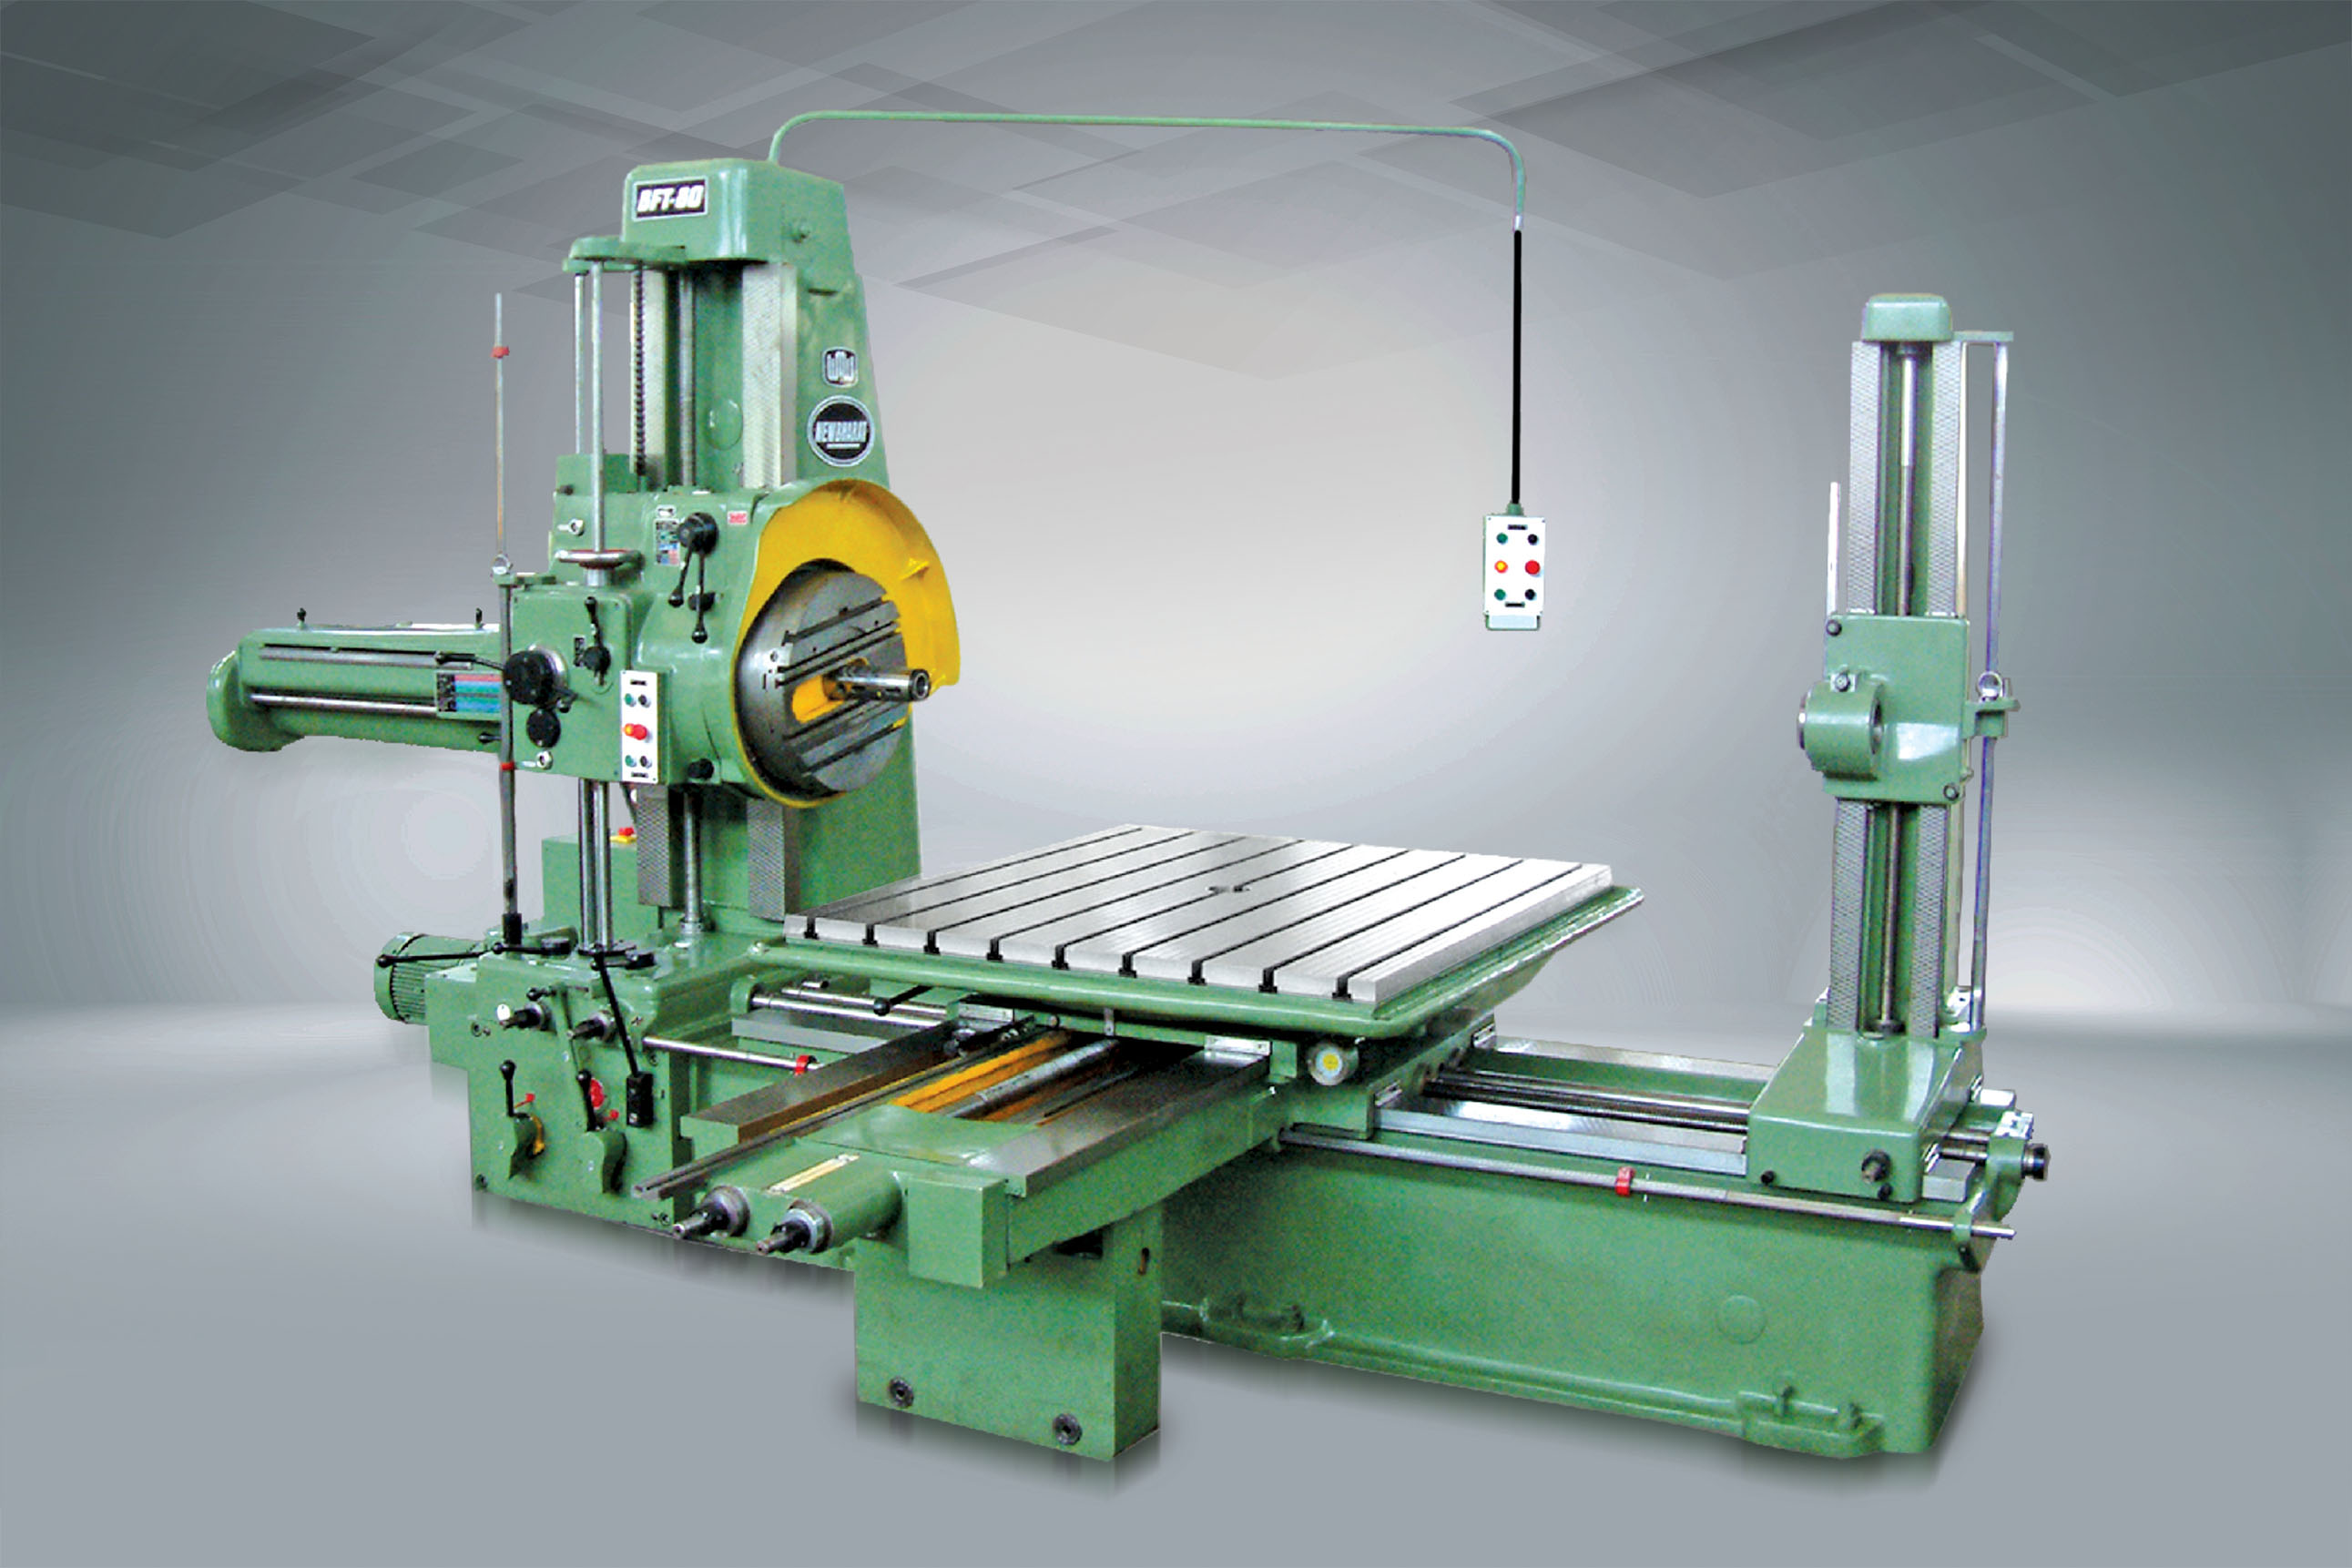 Conventional/ NC Controlled Horizontal Boring and Milling Machine